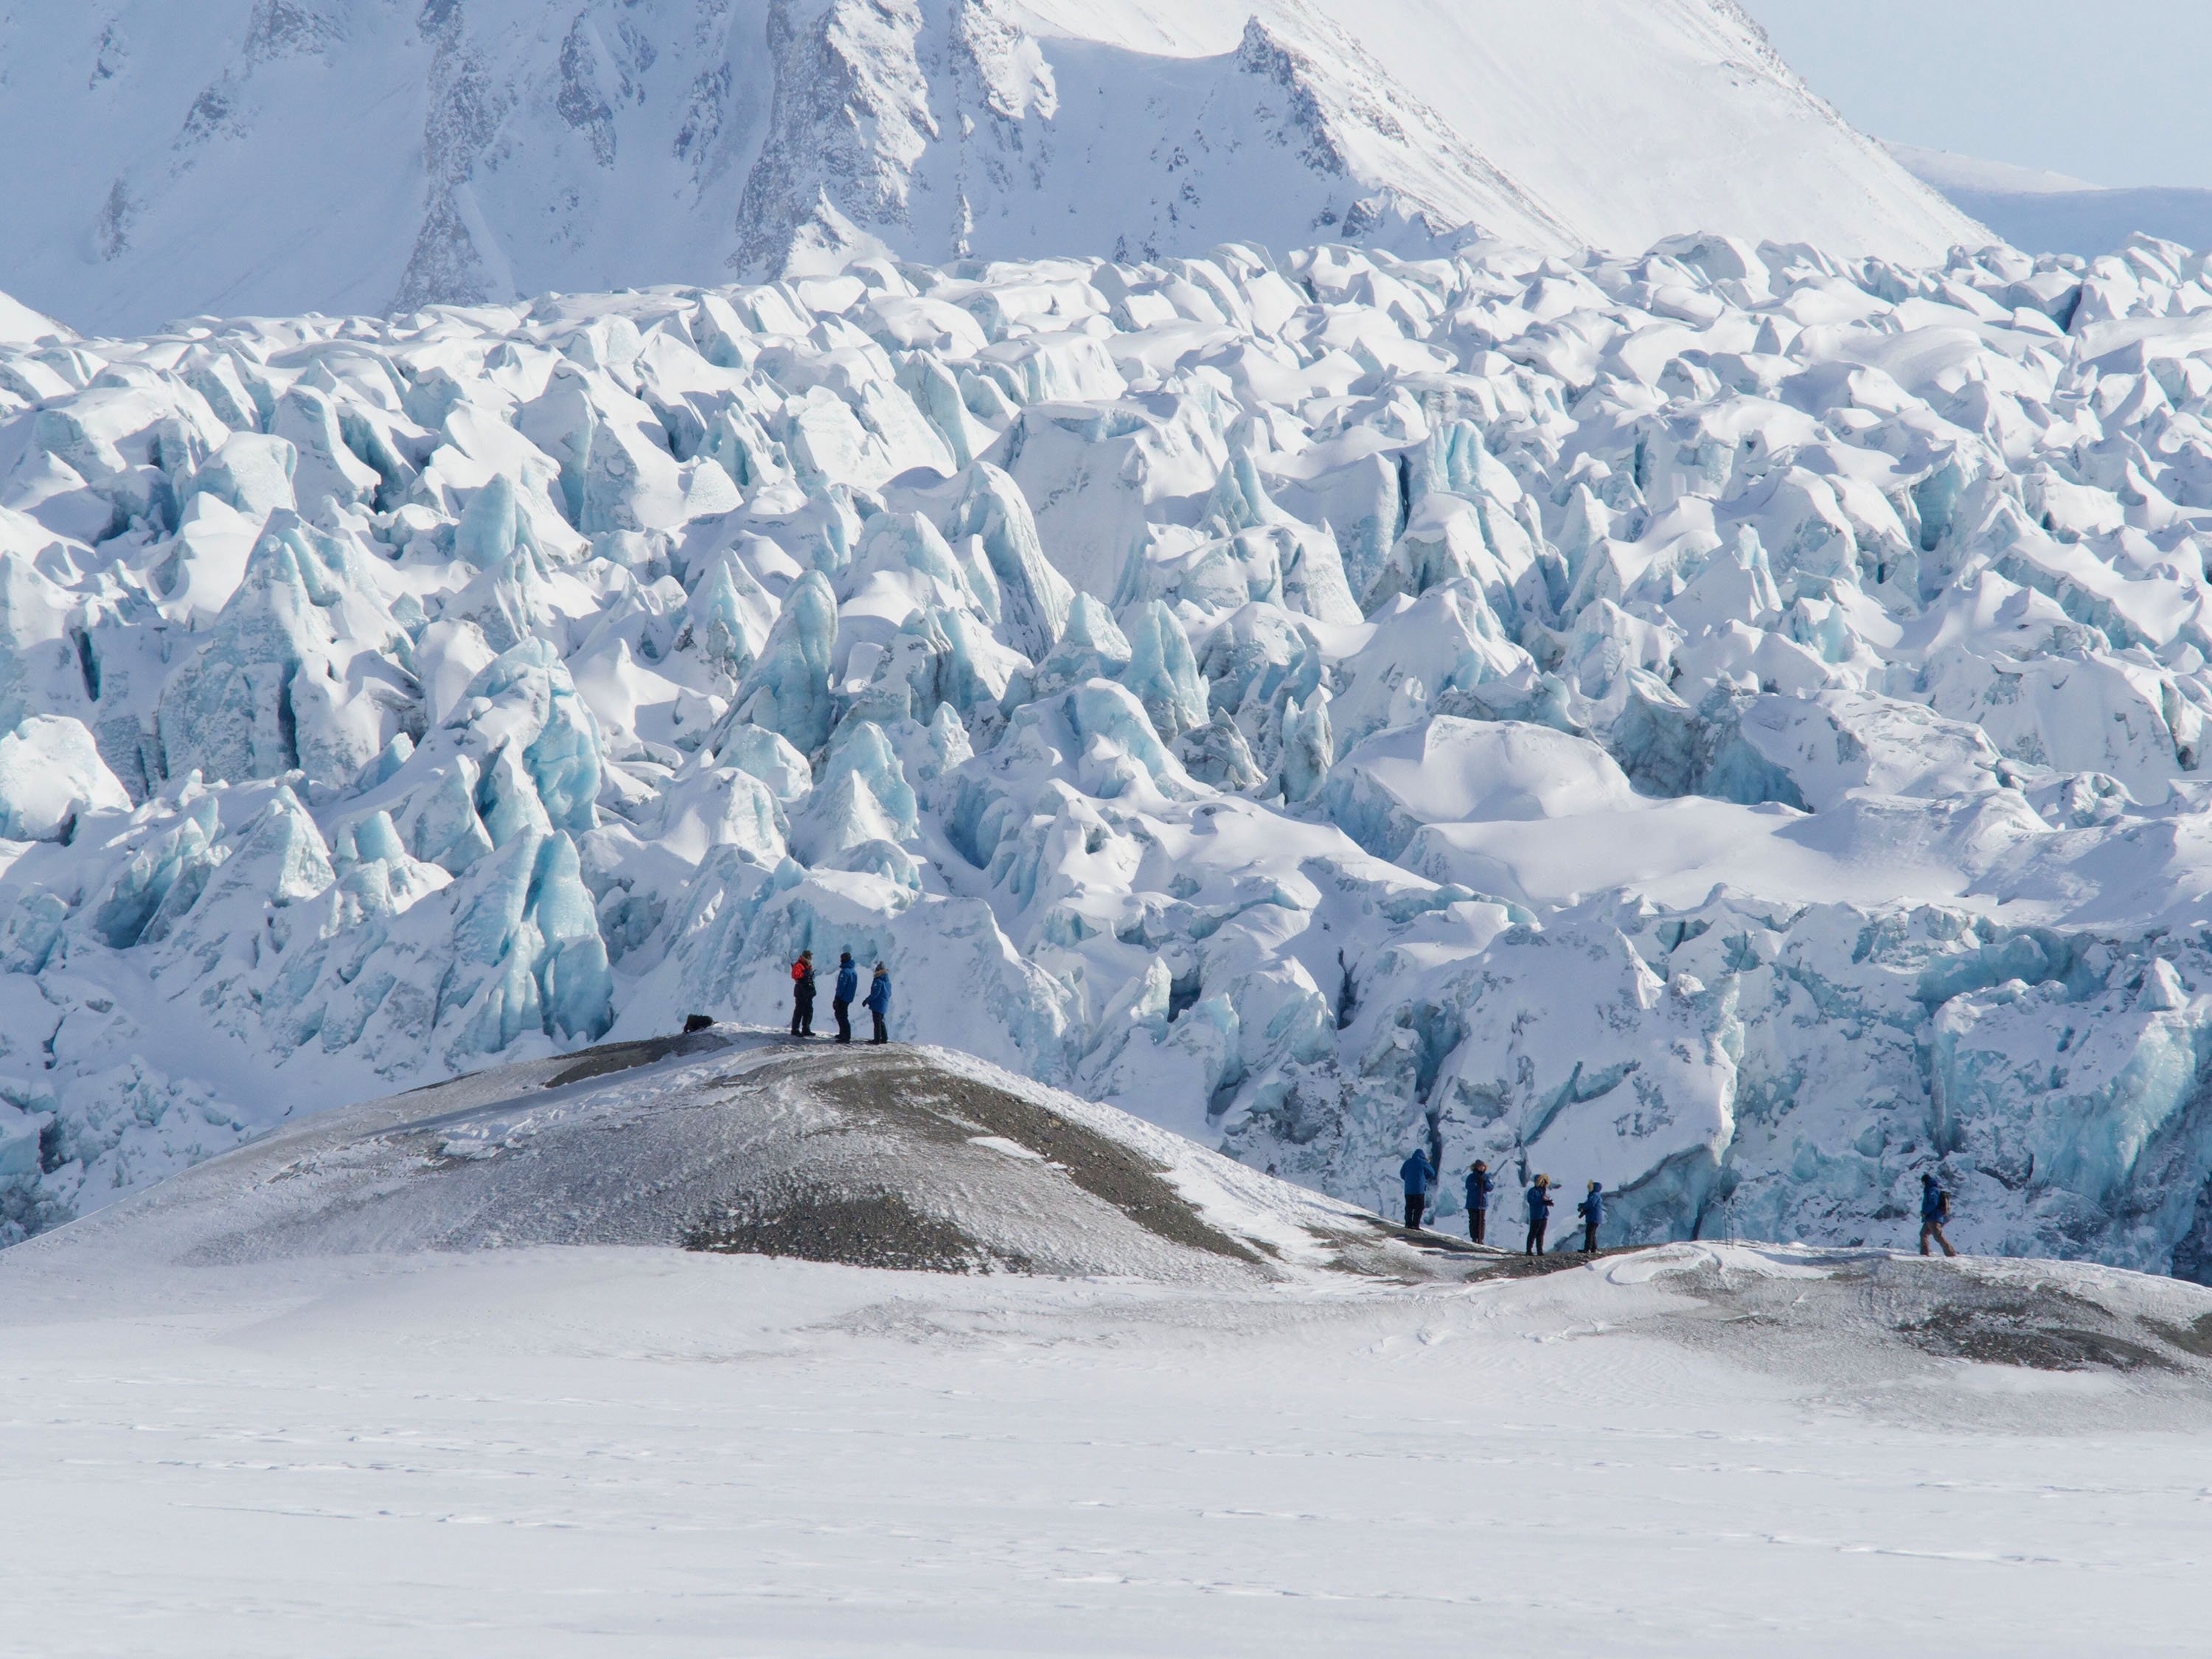 hikers in front of a massive glacier